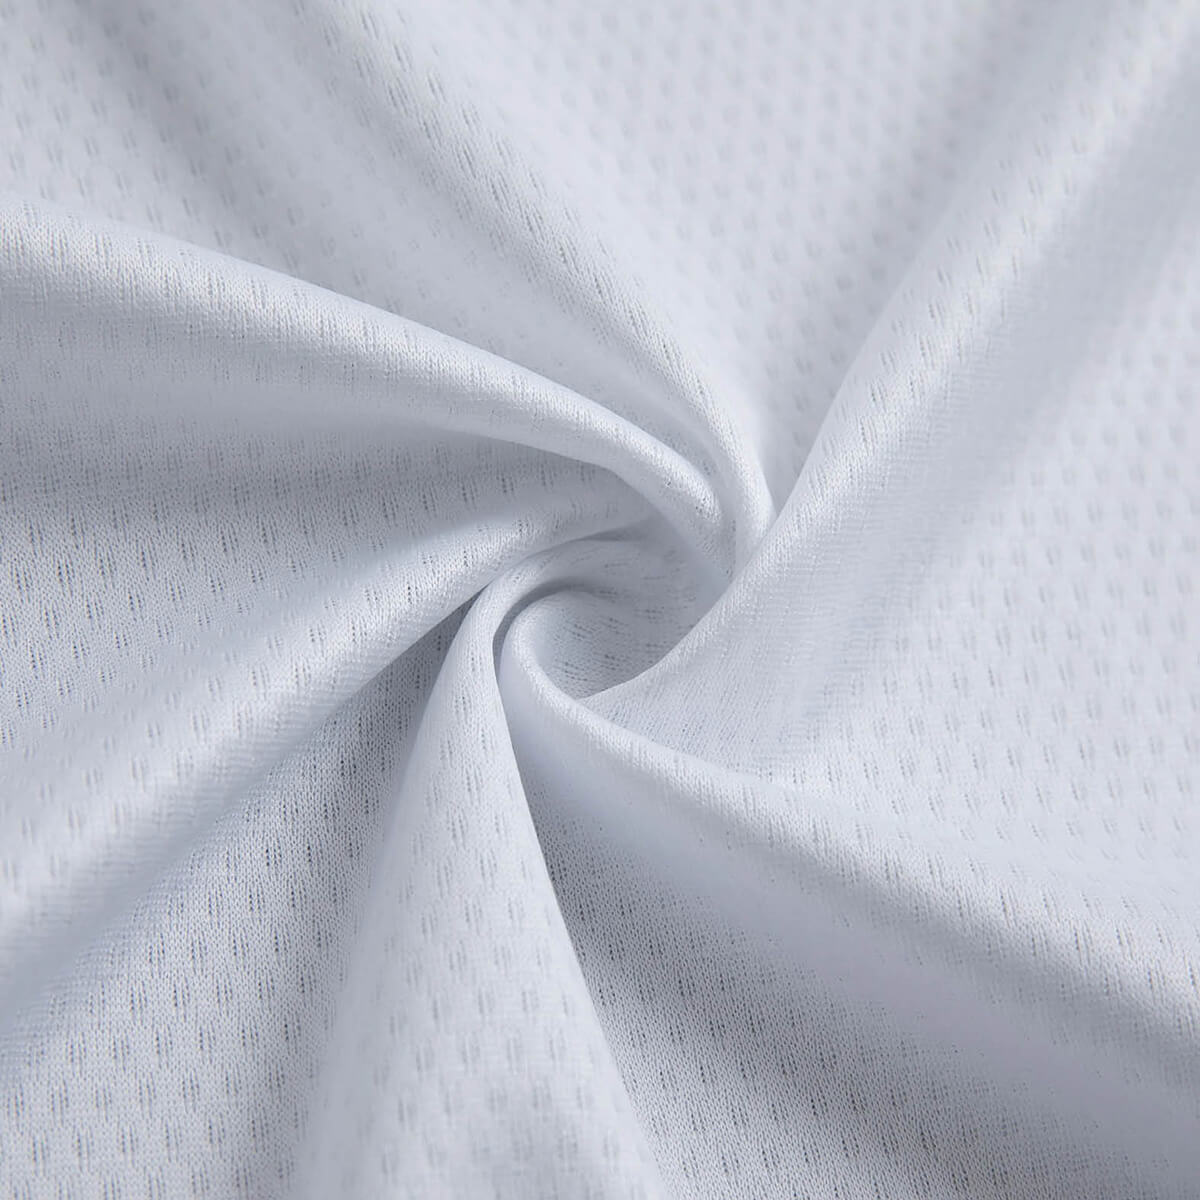 Breathable fabric for comfort